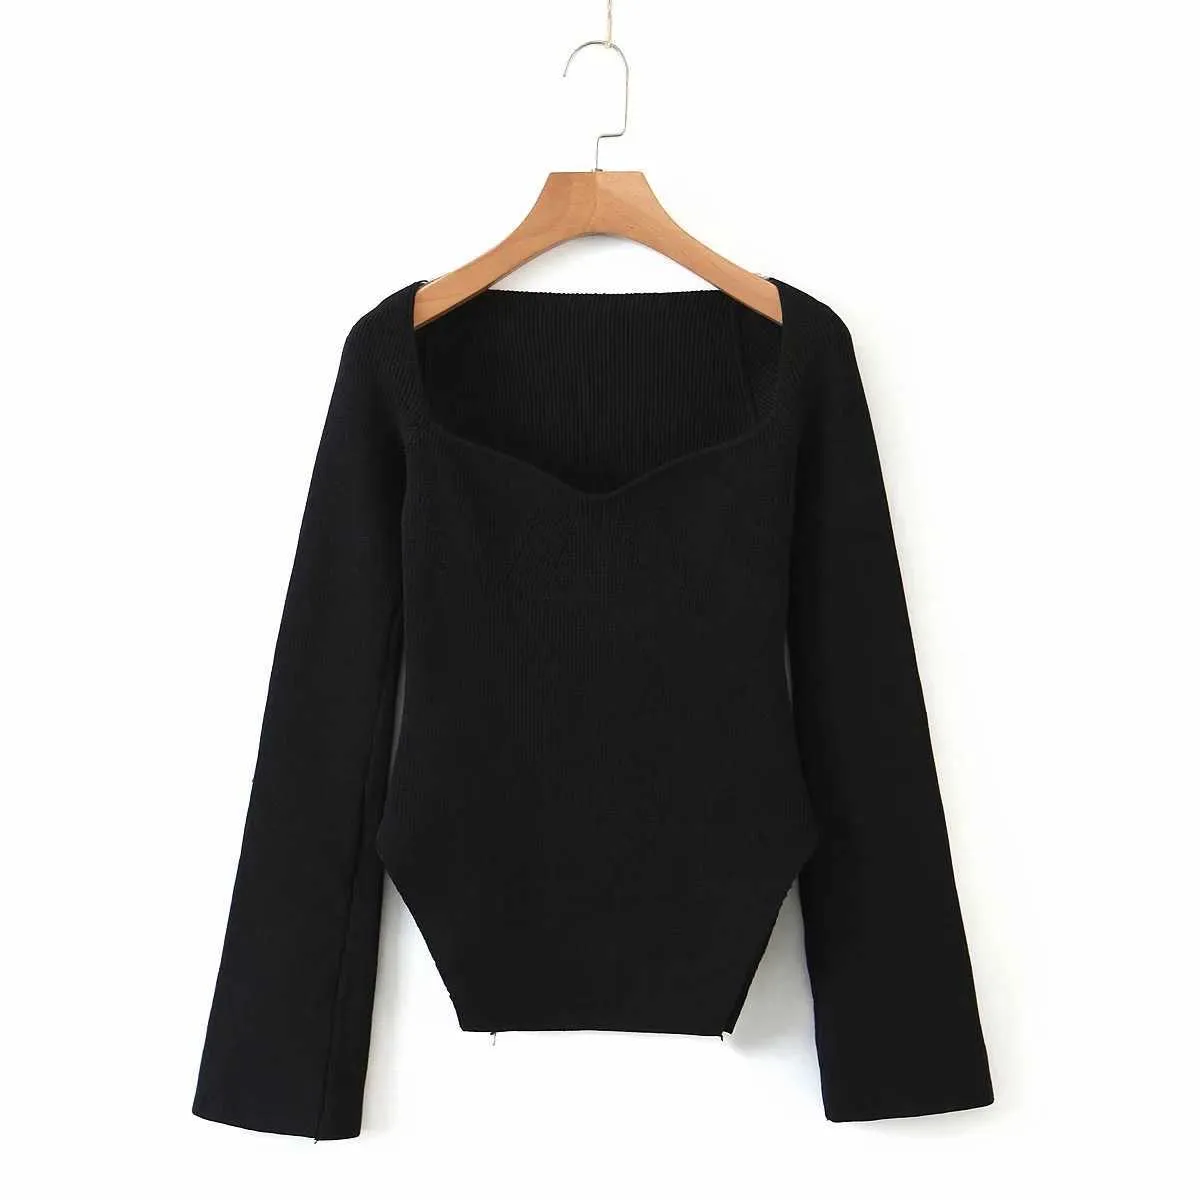 French elegant sexy square slimming curve hem split solid sweater Casual Top Autumn Winter Black Pullover Solid Jumper Knit 211007